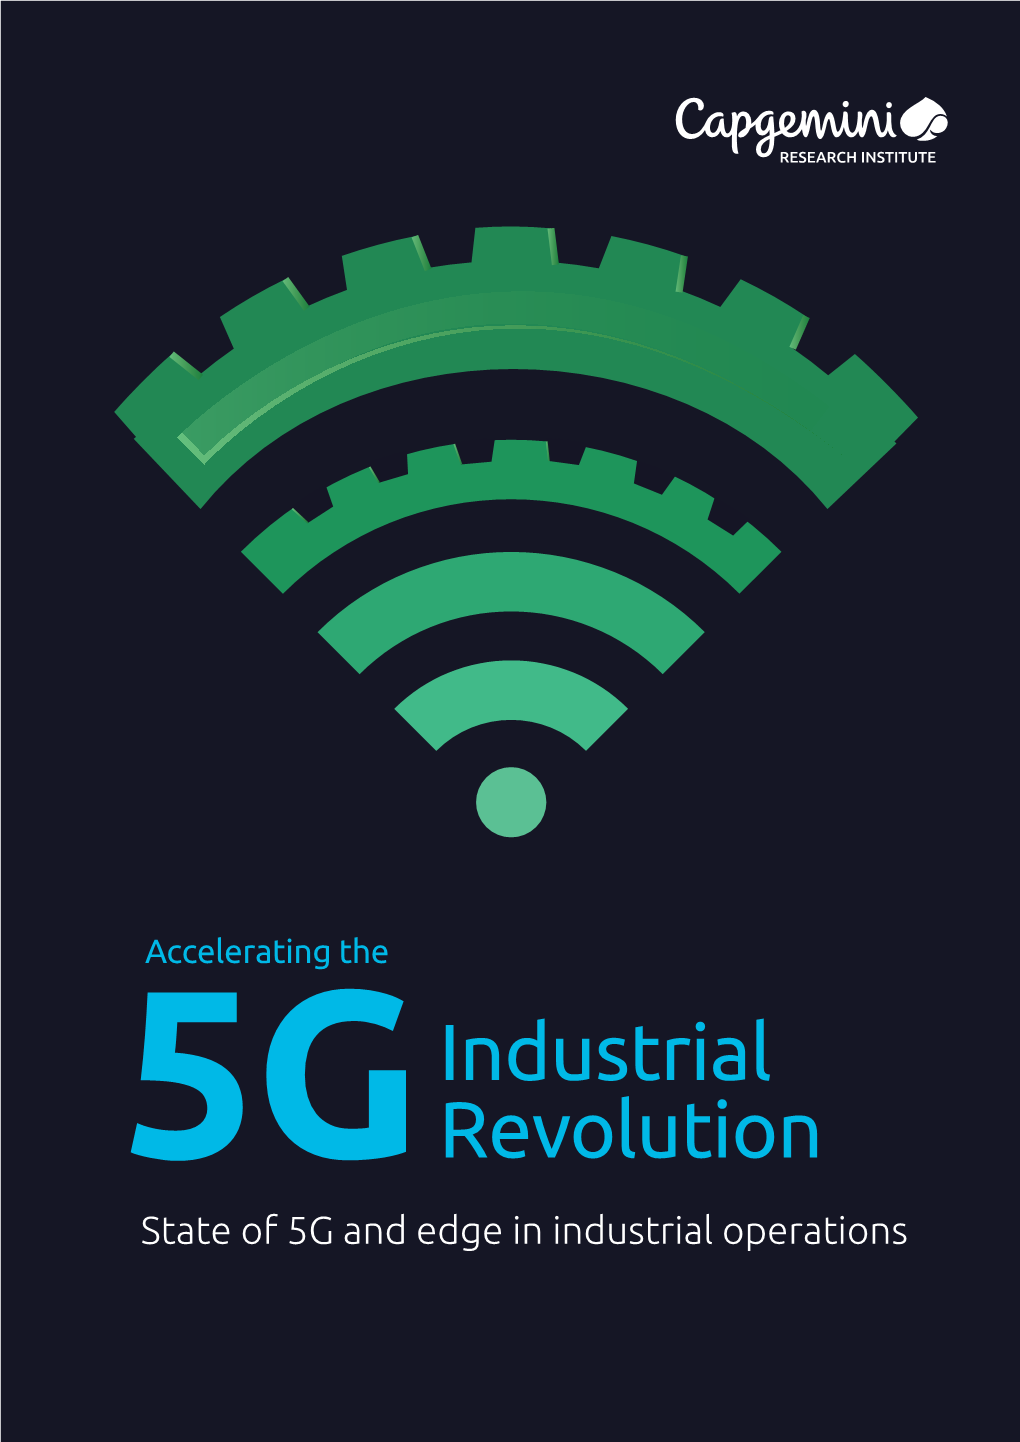 State of 5G and Edge in Industrial Operations Introduction